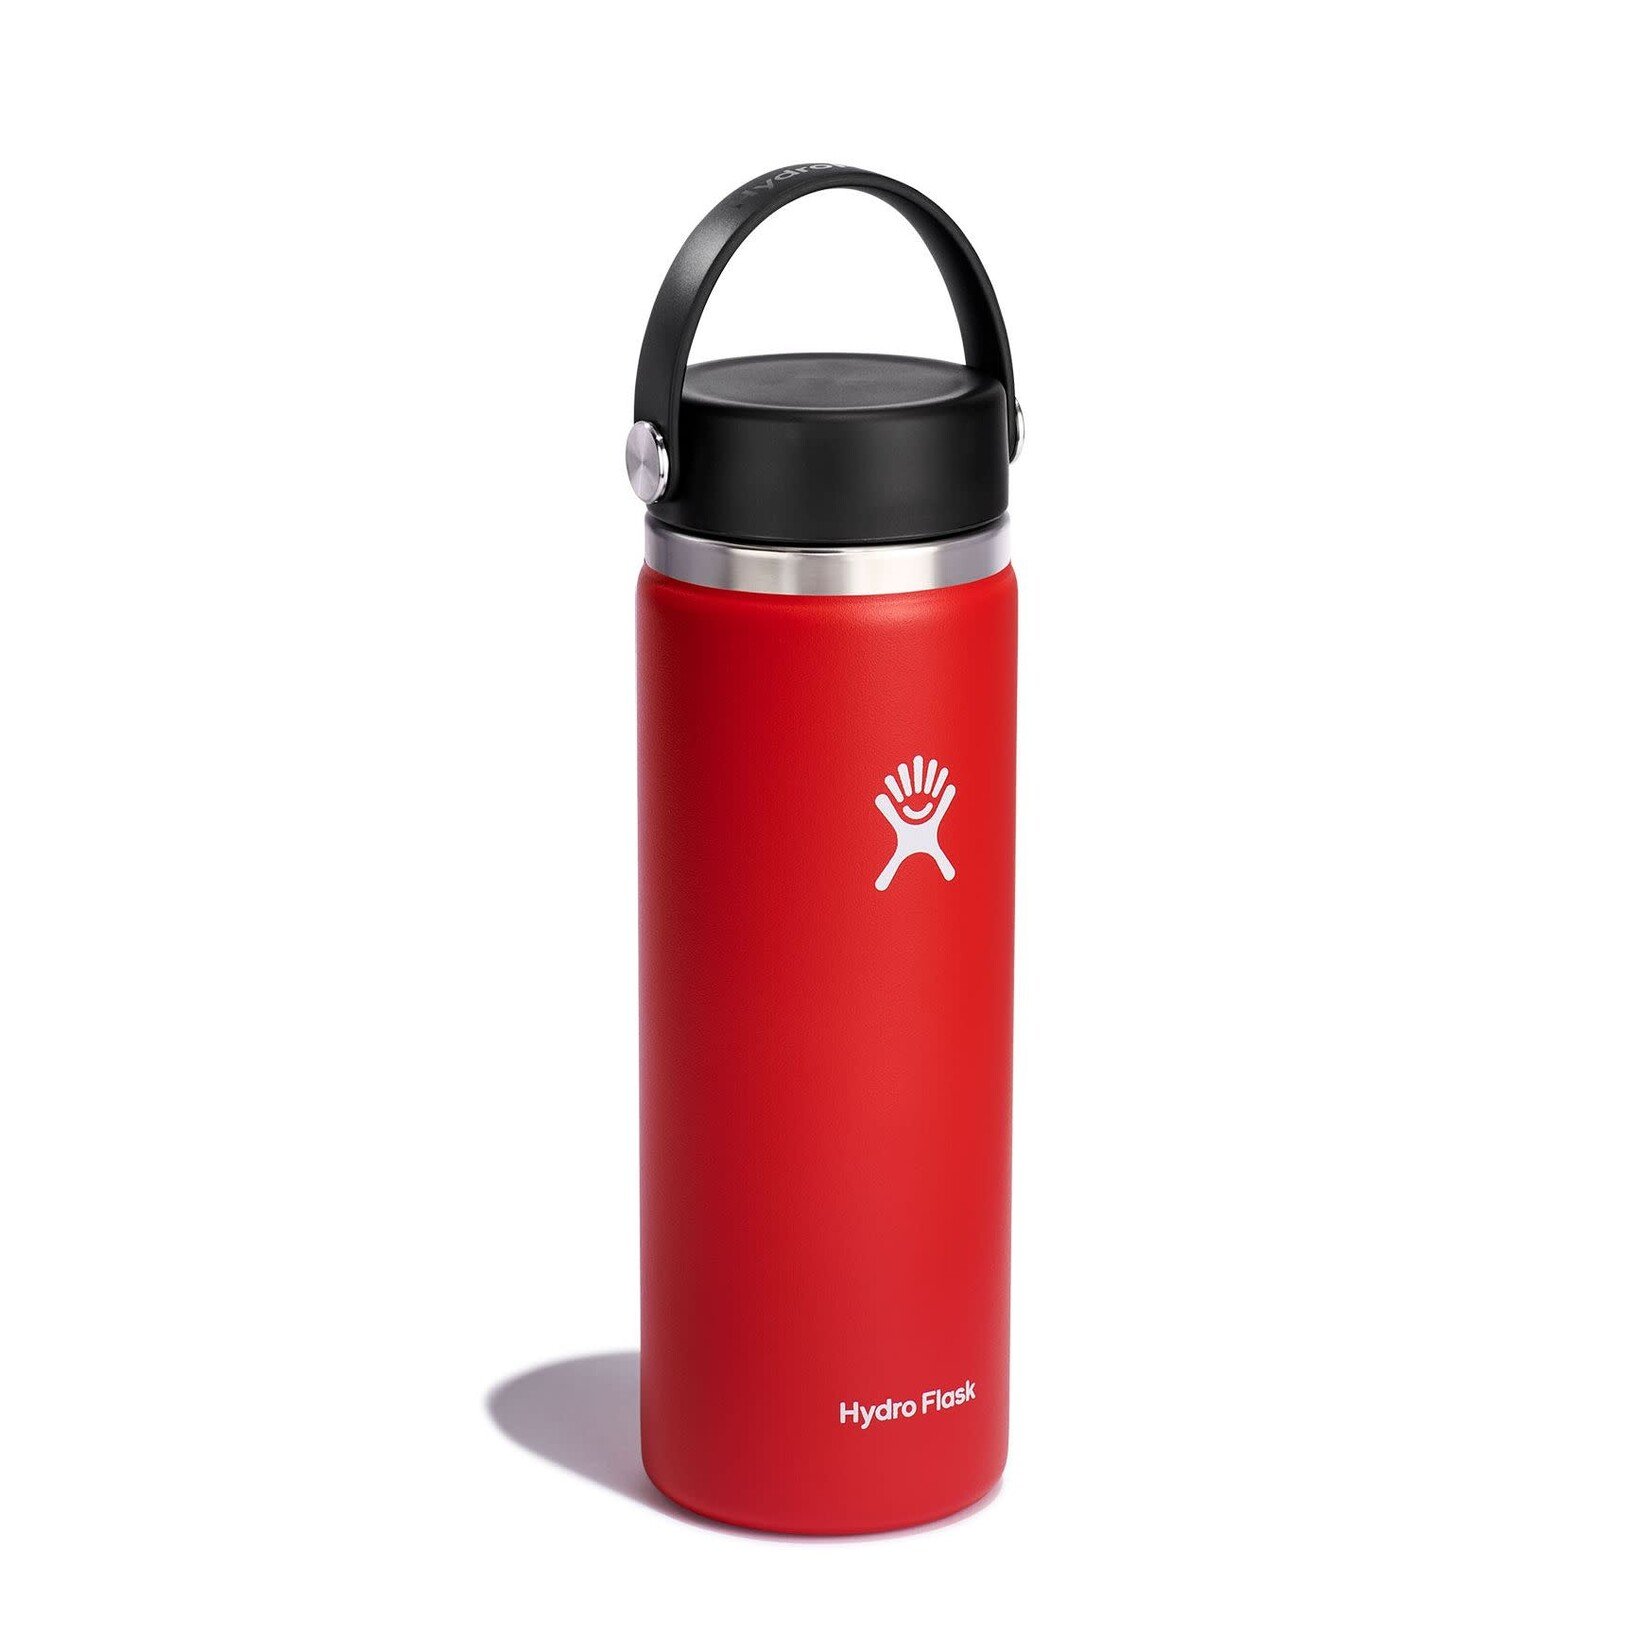 HydroFlask Hydro Flask 20 oz Wide Mouth